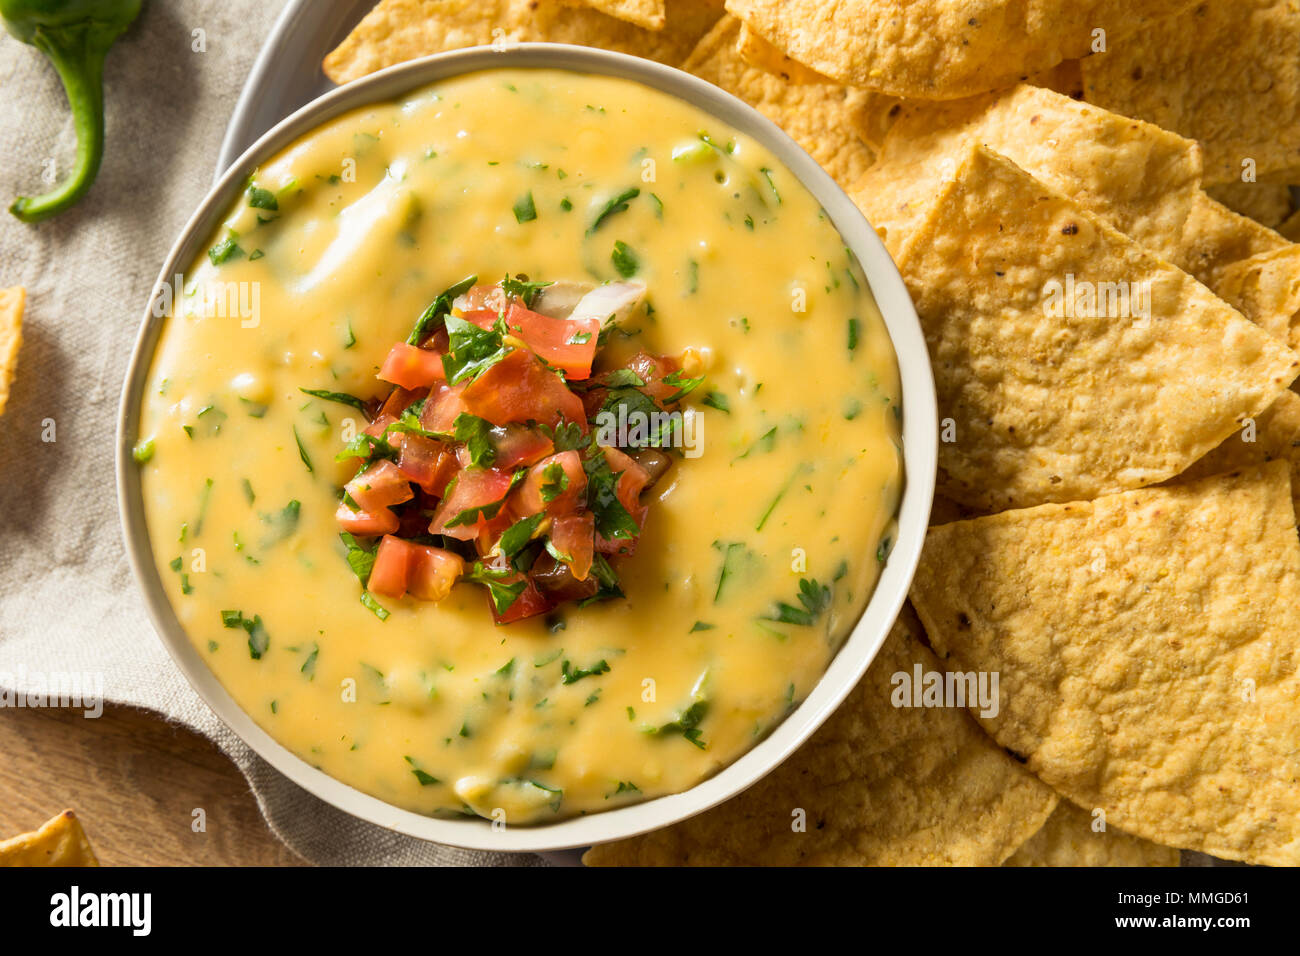 Spicy Homemade Cheesey Queso Dip with Tortilla Chips Stock Photo - Alamy